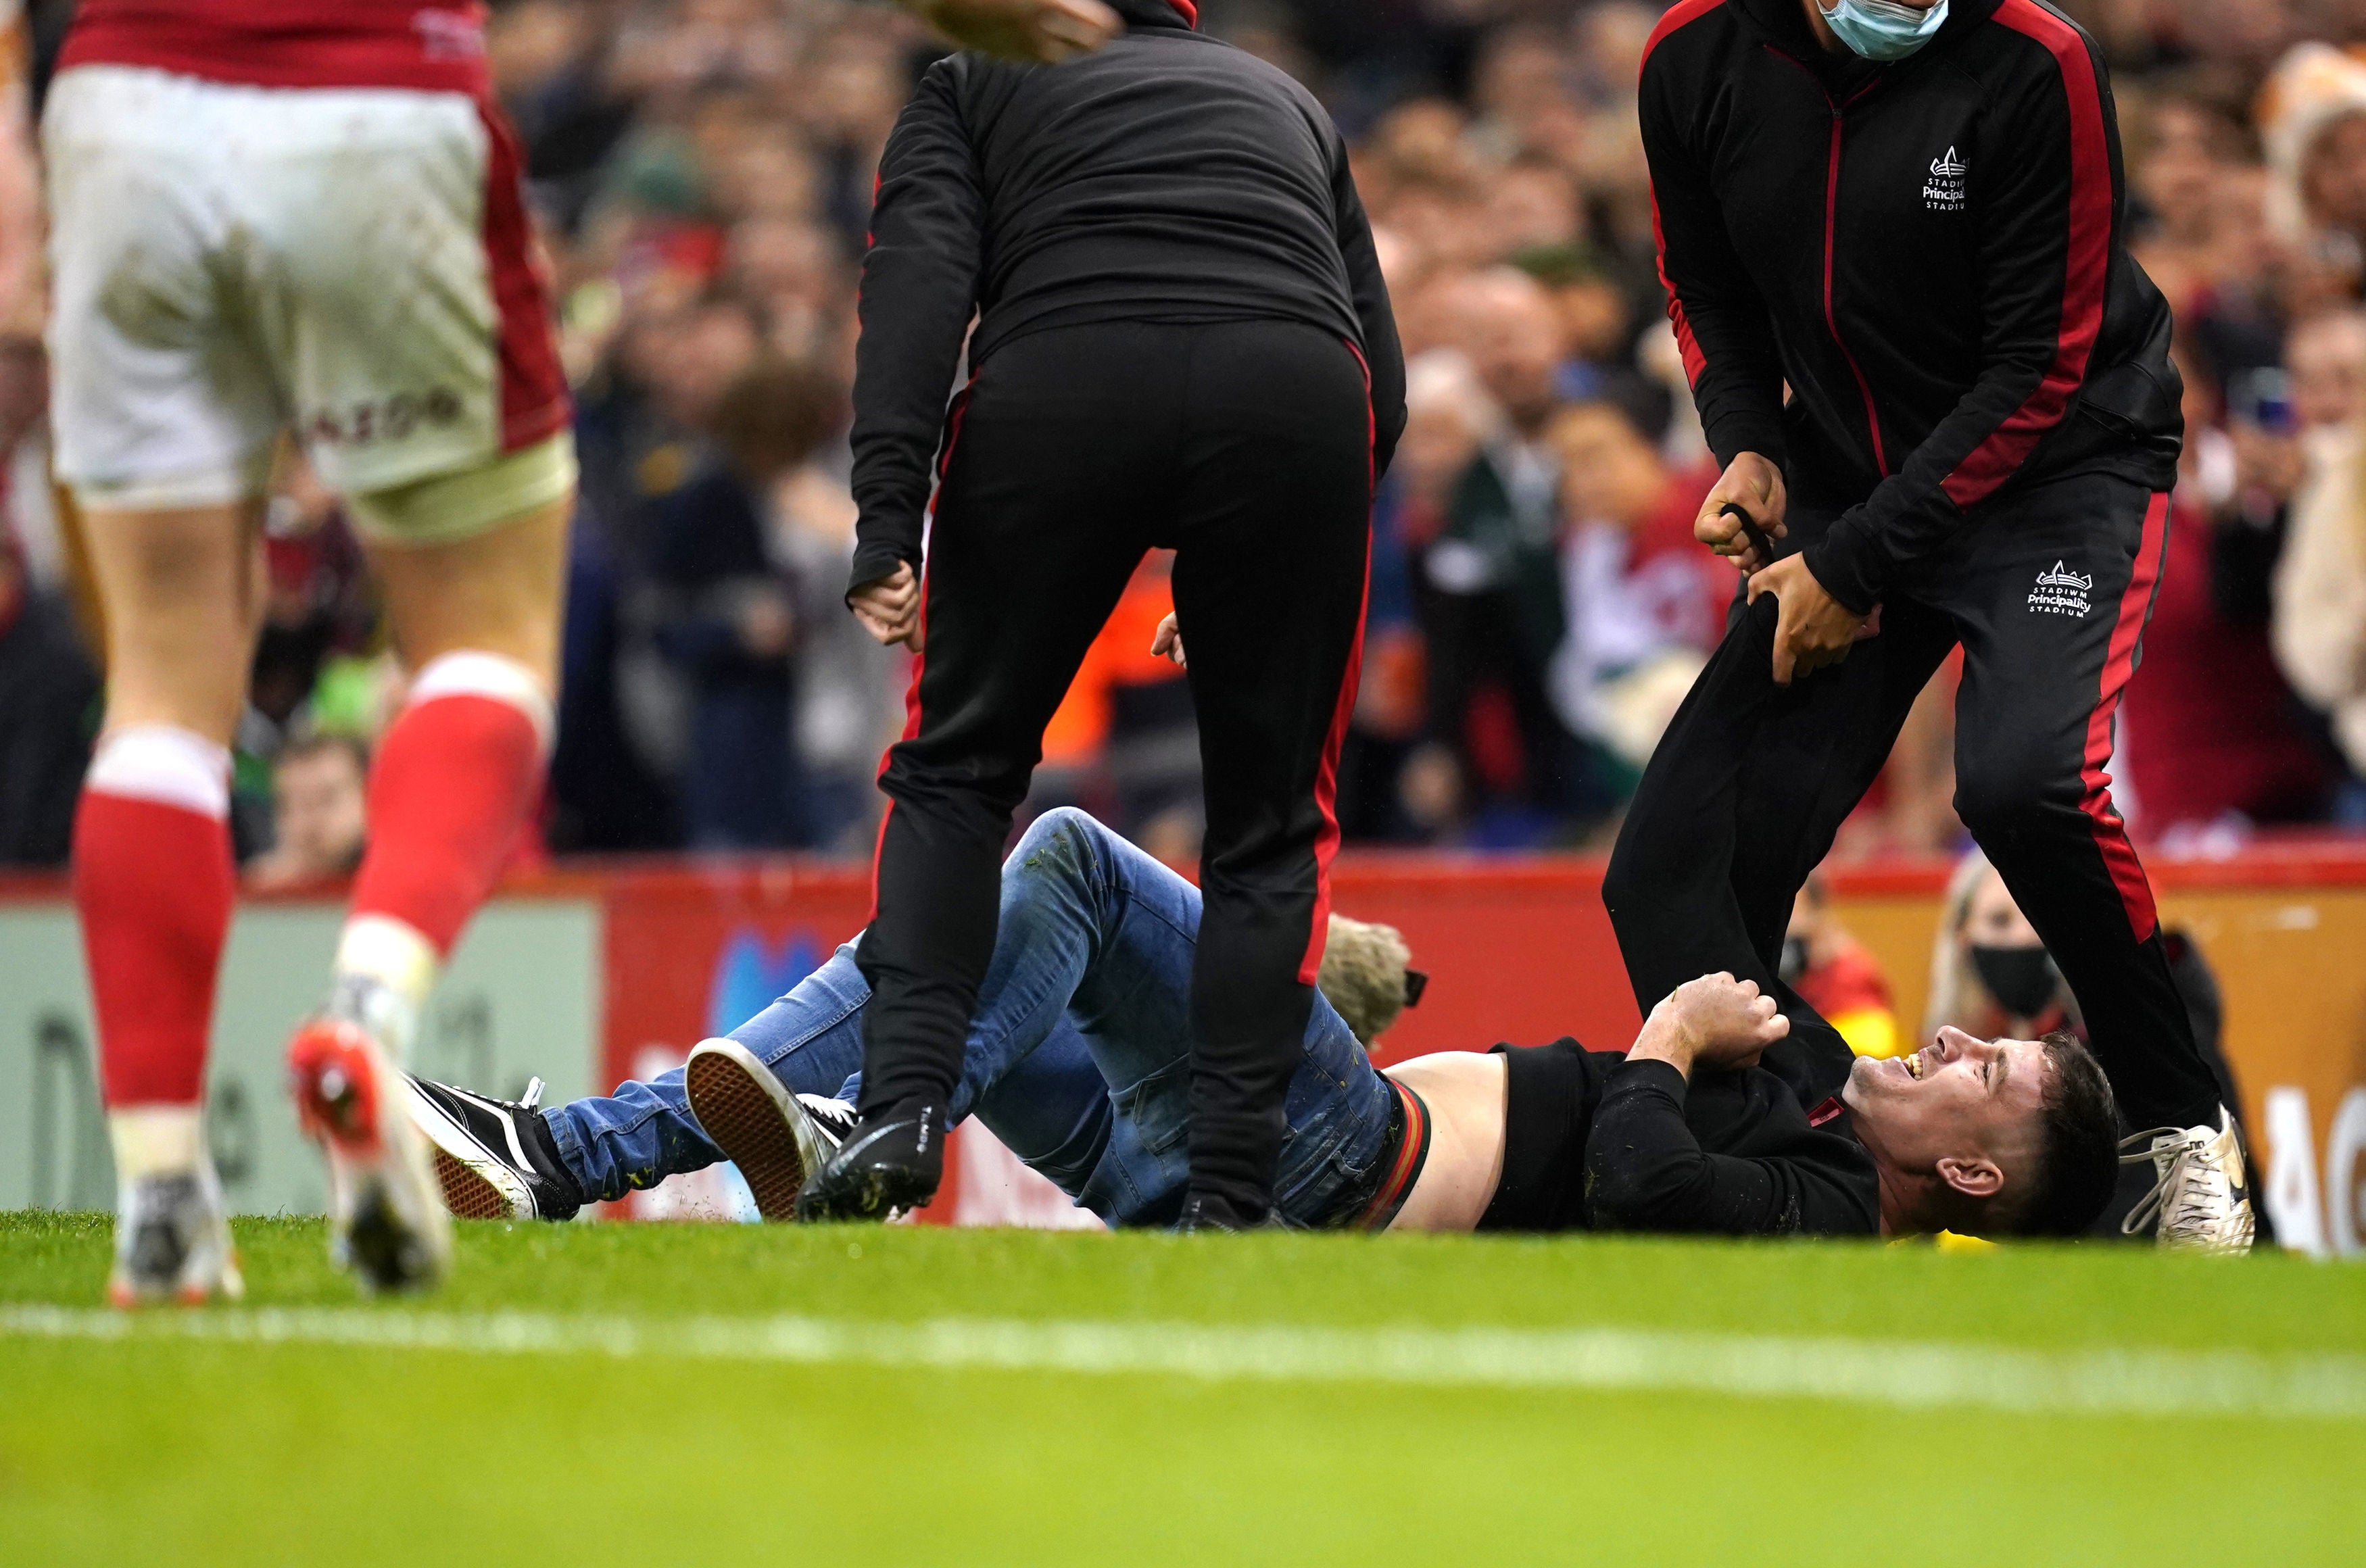 A pitch invader is restrained on the field